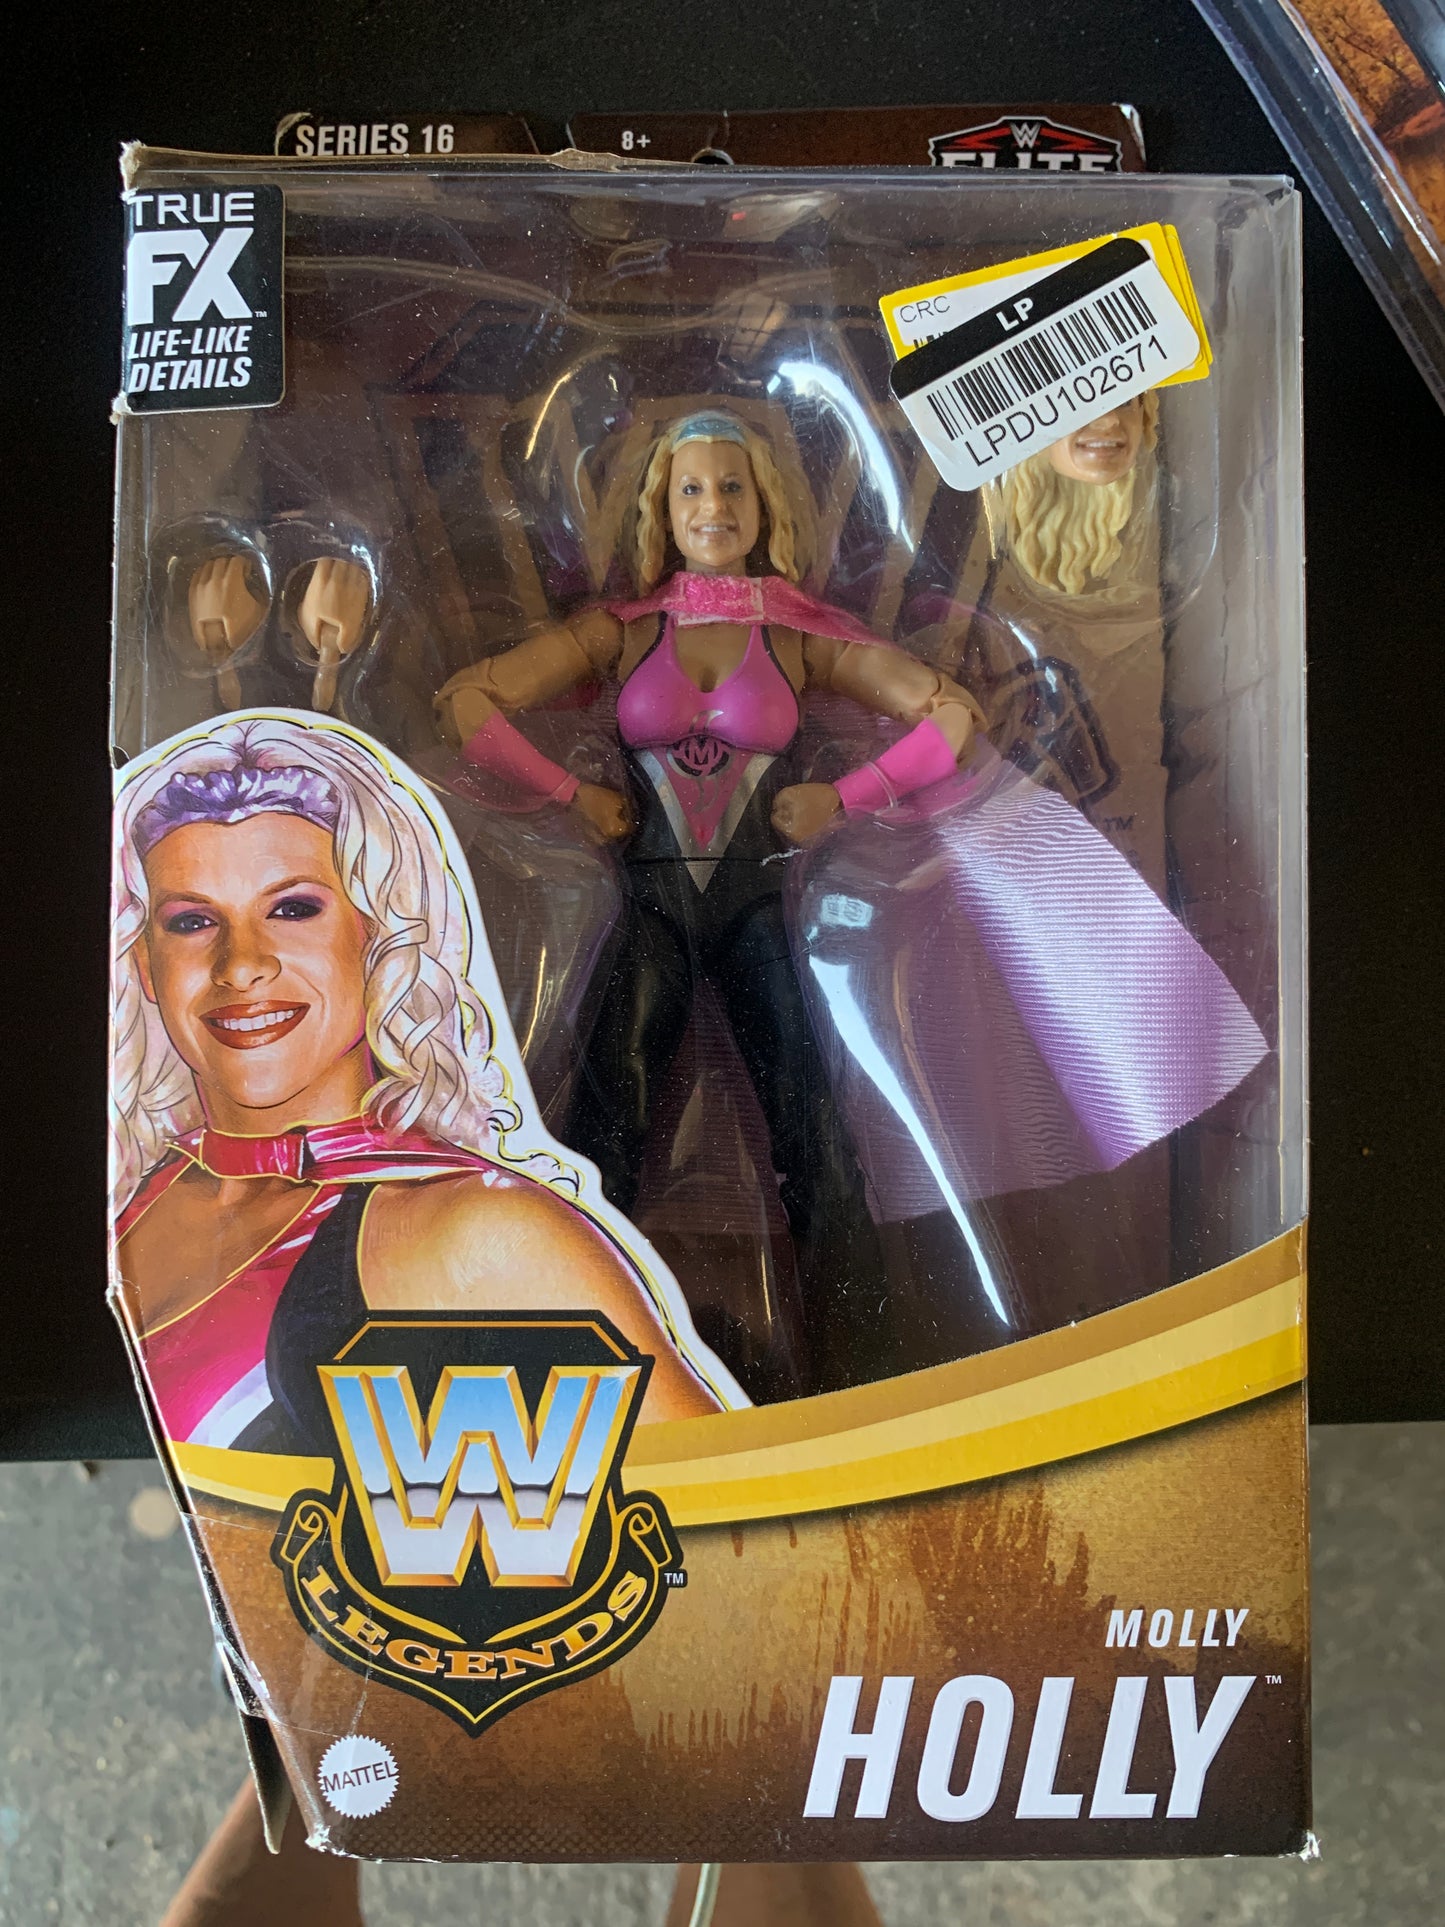 Box damage- WWE Legends Elite Collection Molly Holly
Action Figure - Series #16 (Target
Exclusive